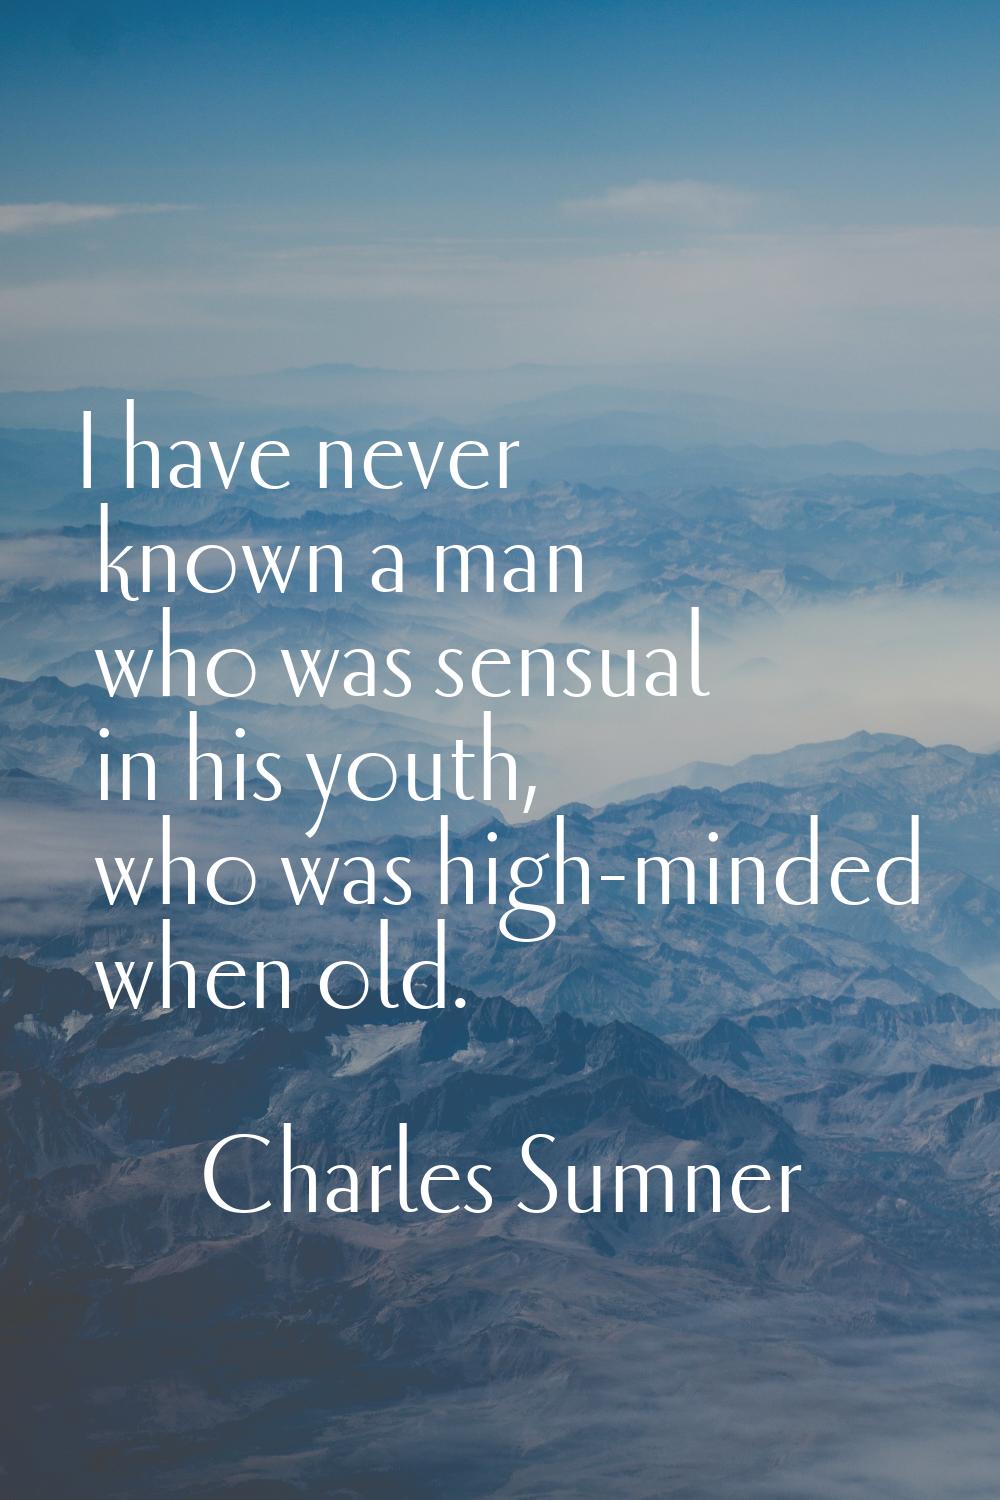 I have never known a man who was sensual in his youth, who was high-minded when old.